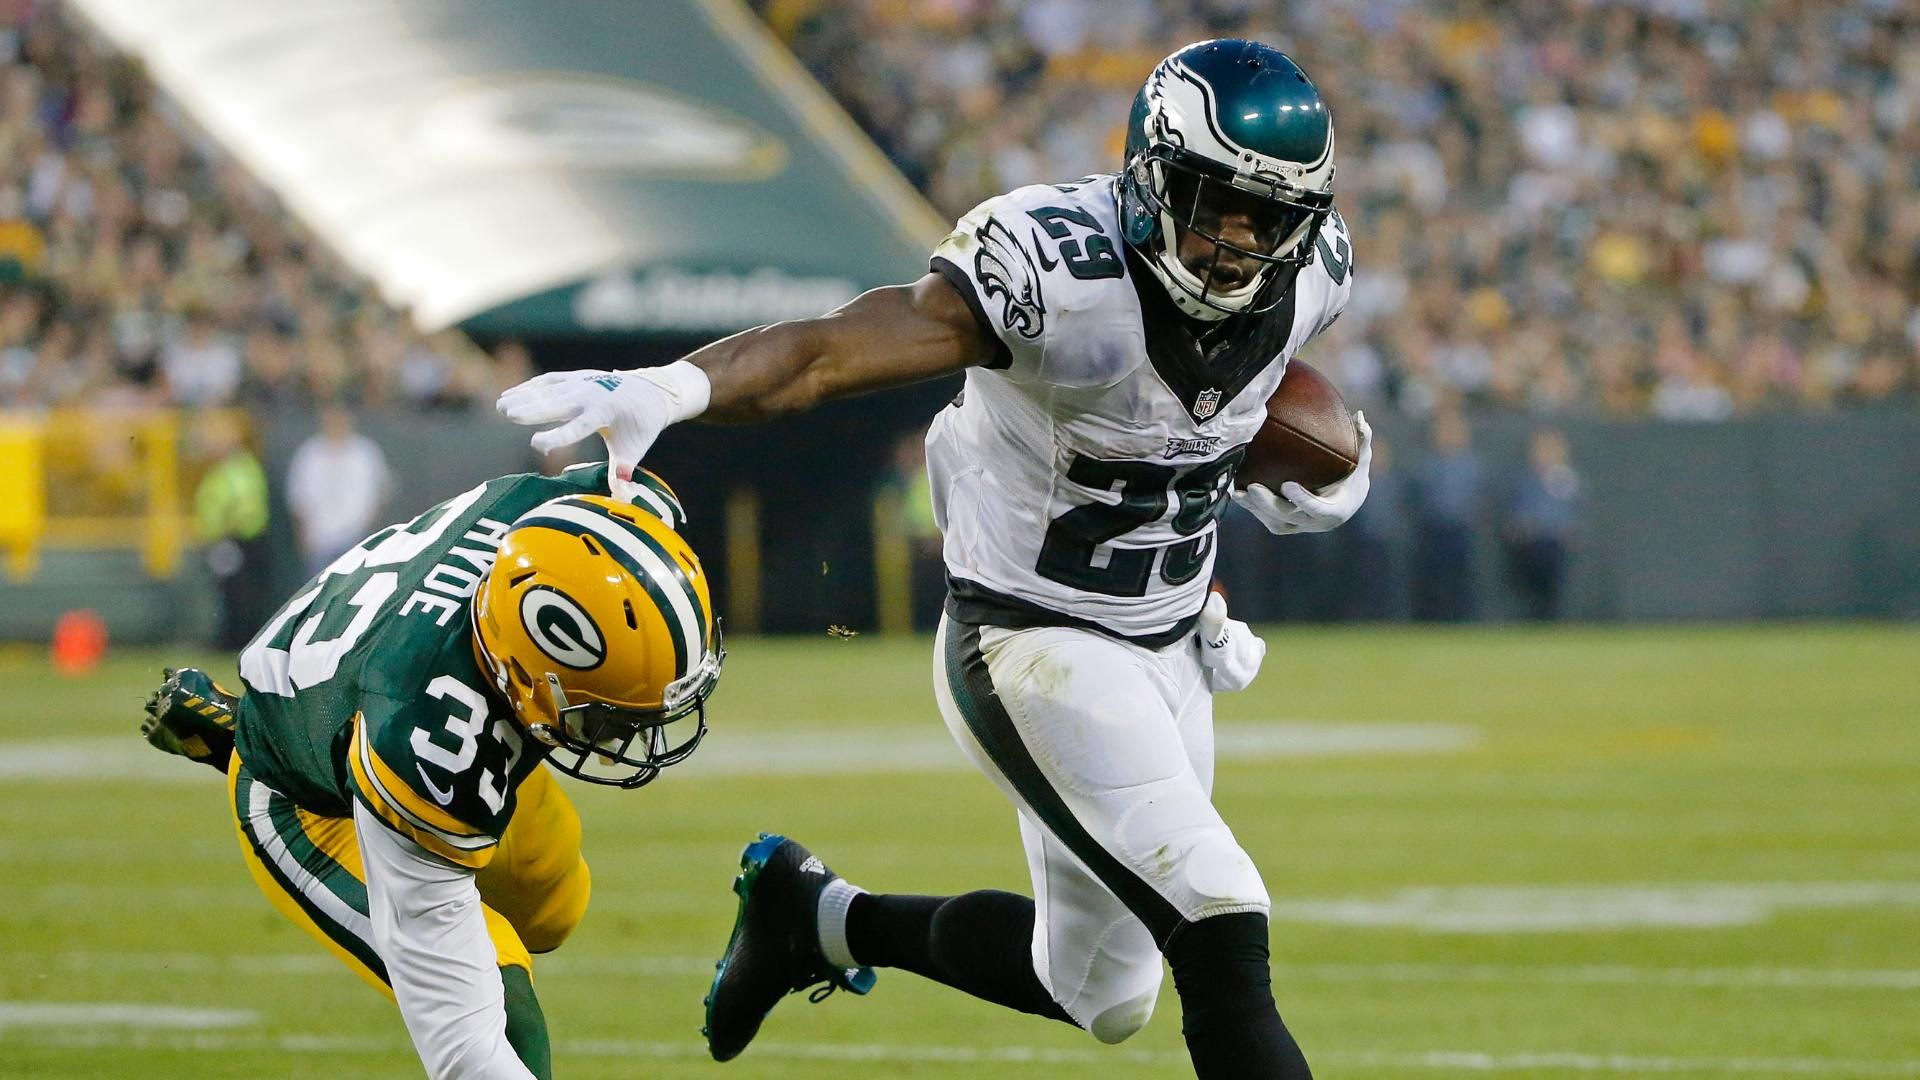 DeMarco Murray leaves practice with hamstring injury